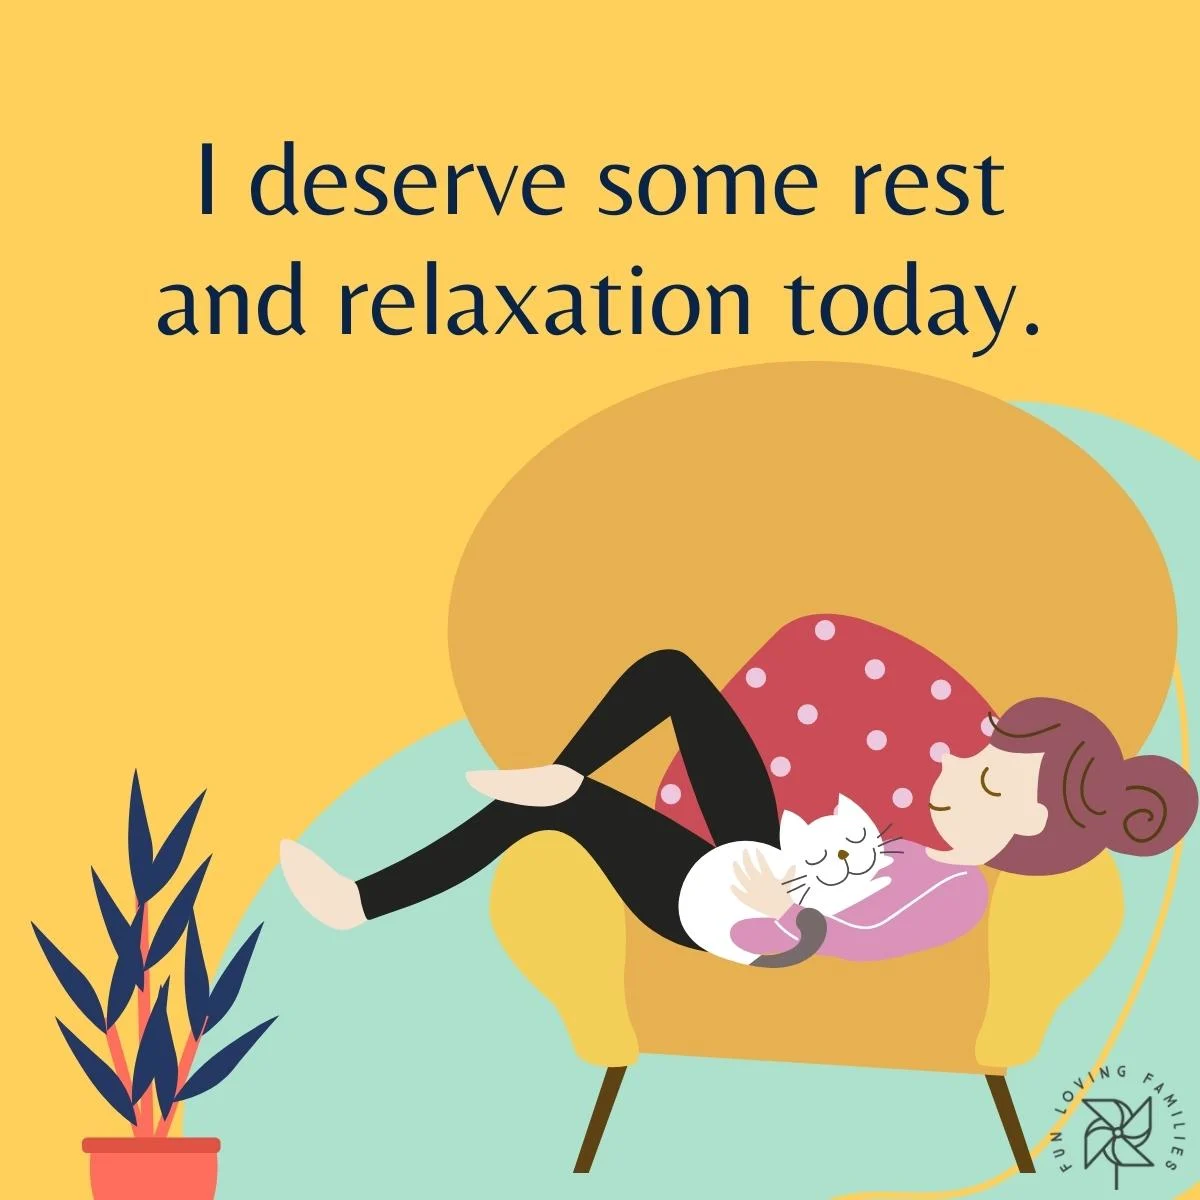 I deserve some rest and relaxation today affirmation